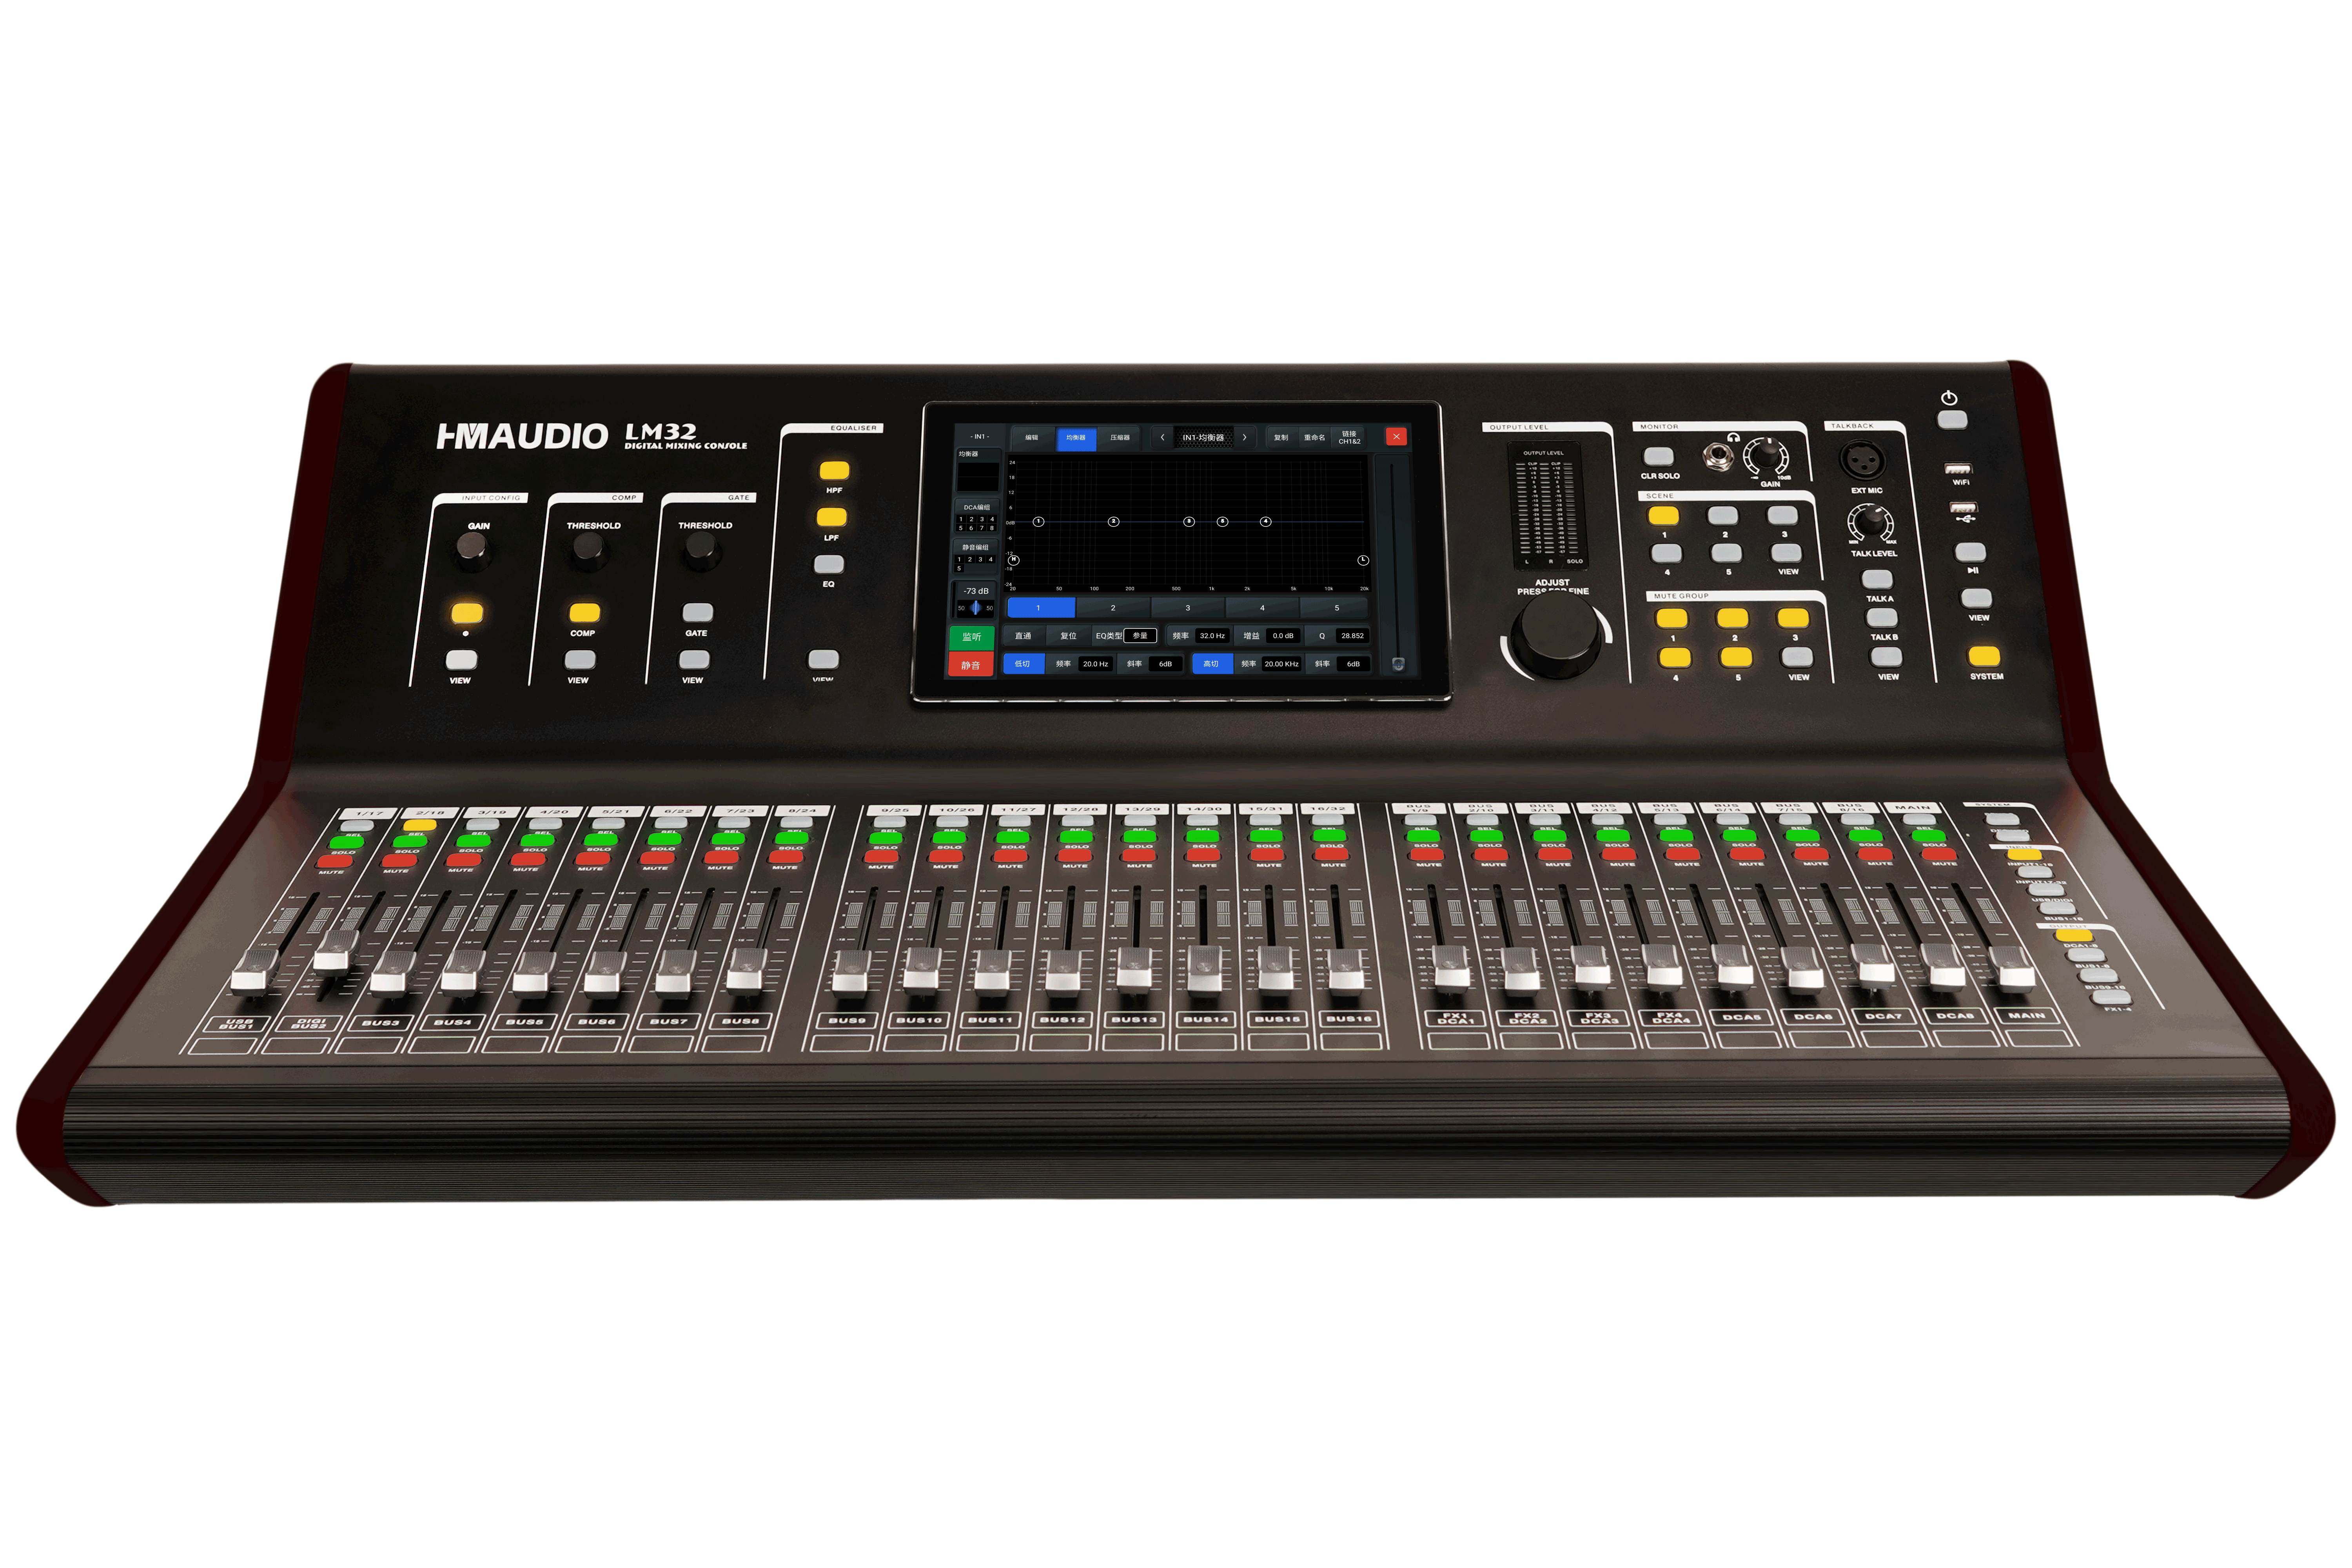 LM32 Digital Mixing Console